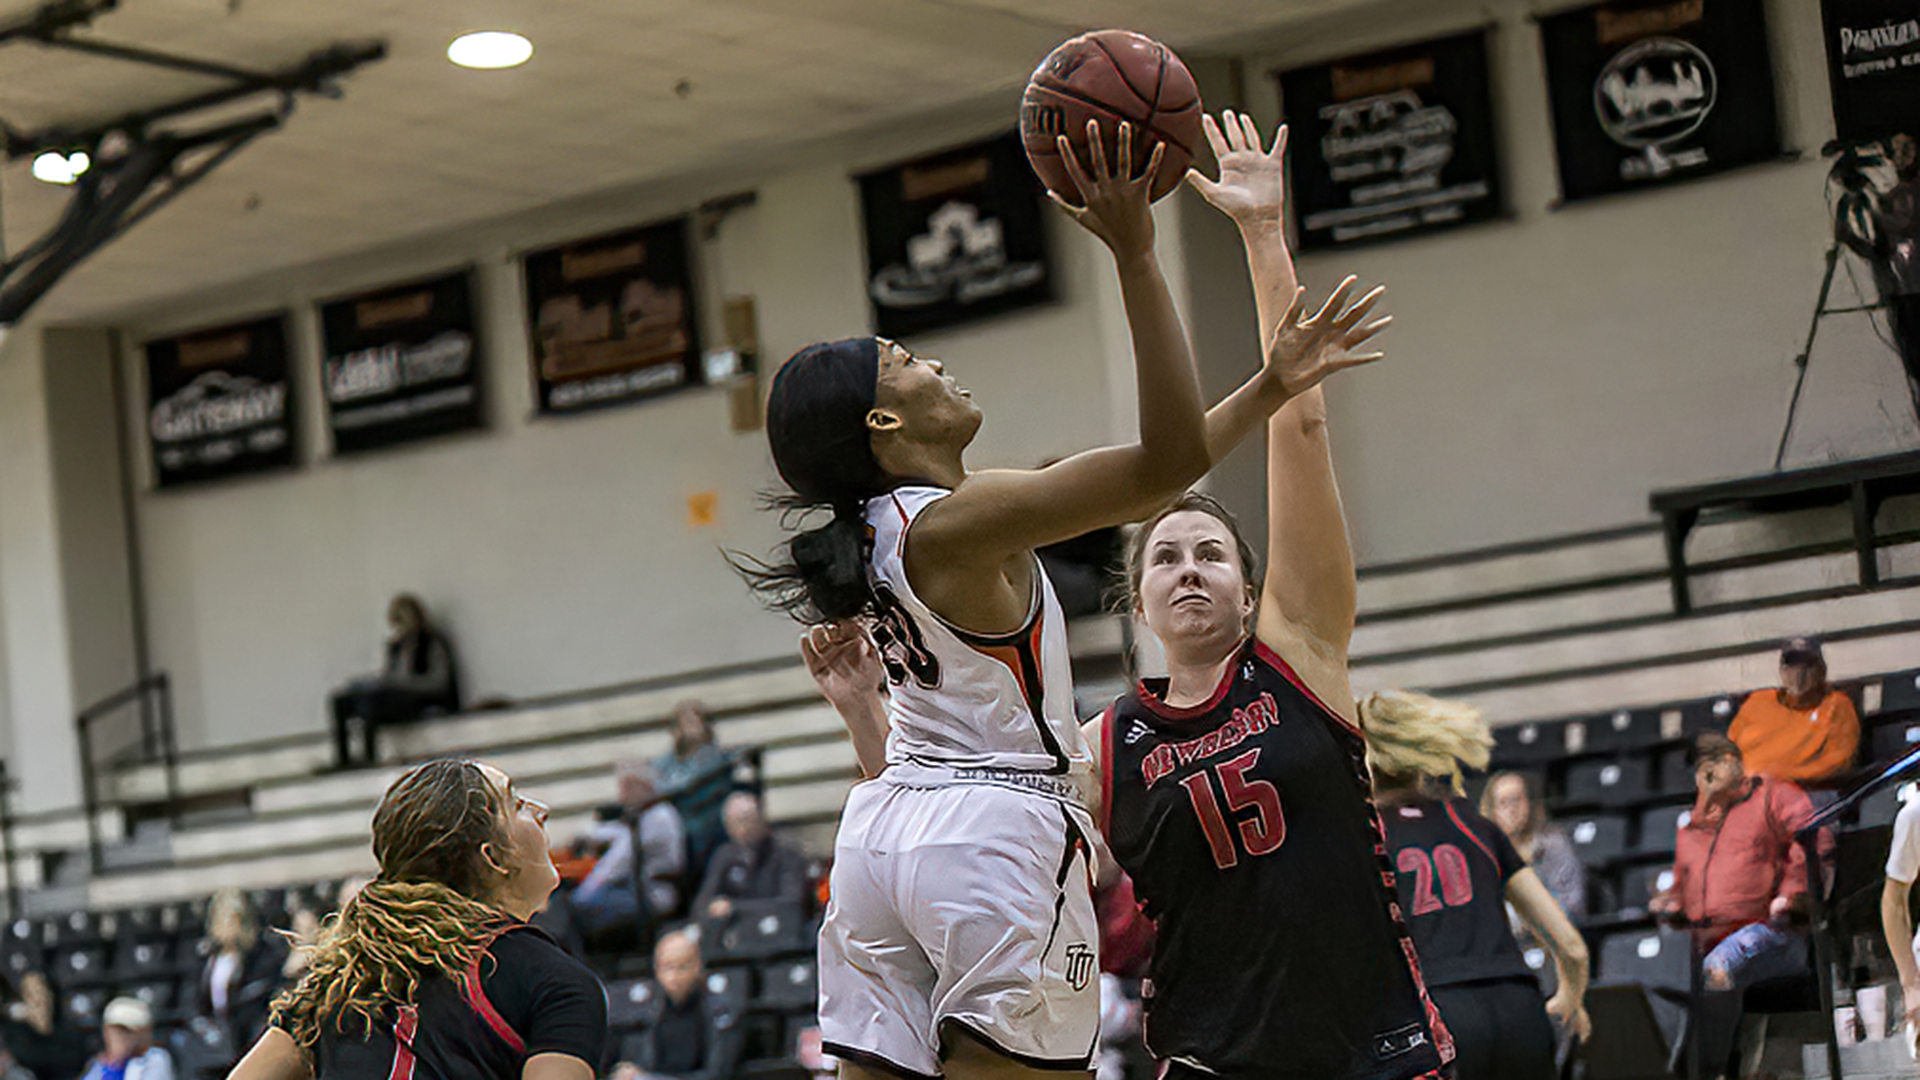 Brianna Dixon scored 21 points in her season debut to lift the Pioneers to a 71-61 win over Newberry (photo by Chuck Williams)